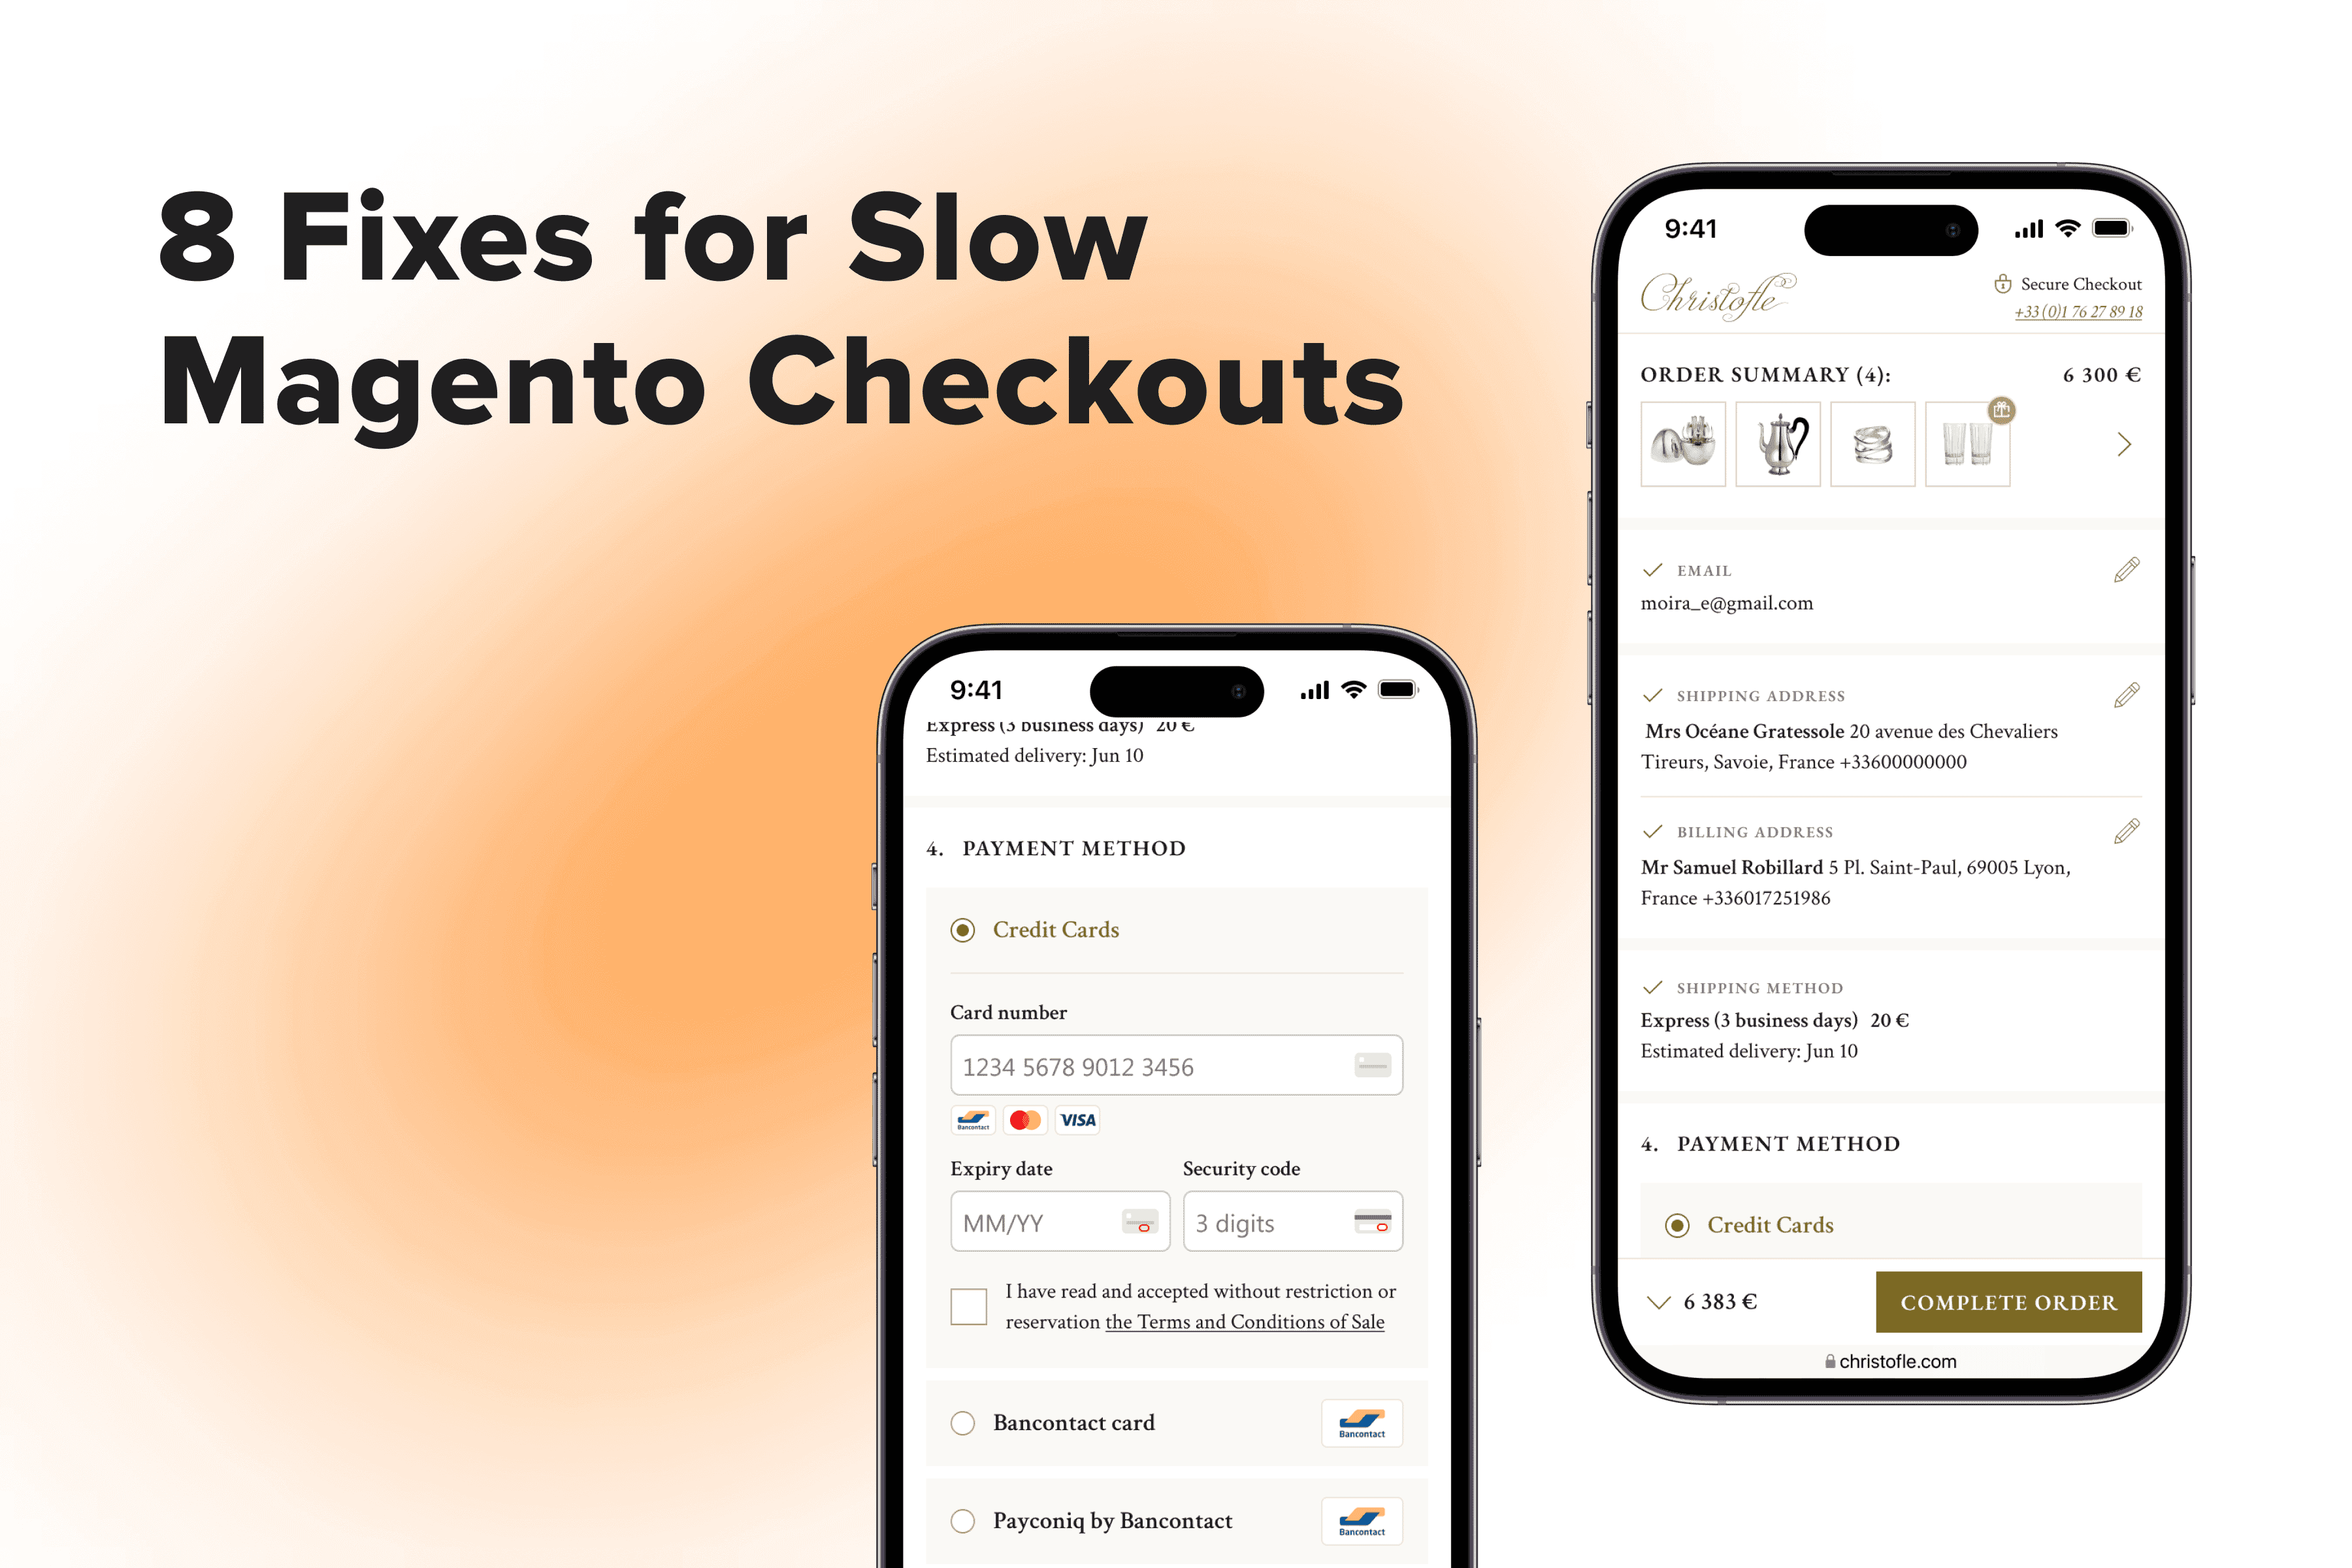 Magento Checkout Slow? Fix It in 8 Simple Steps